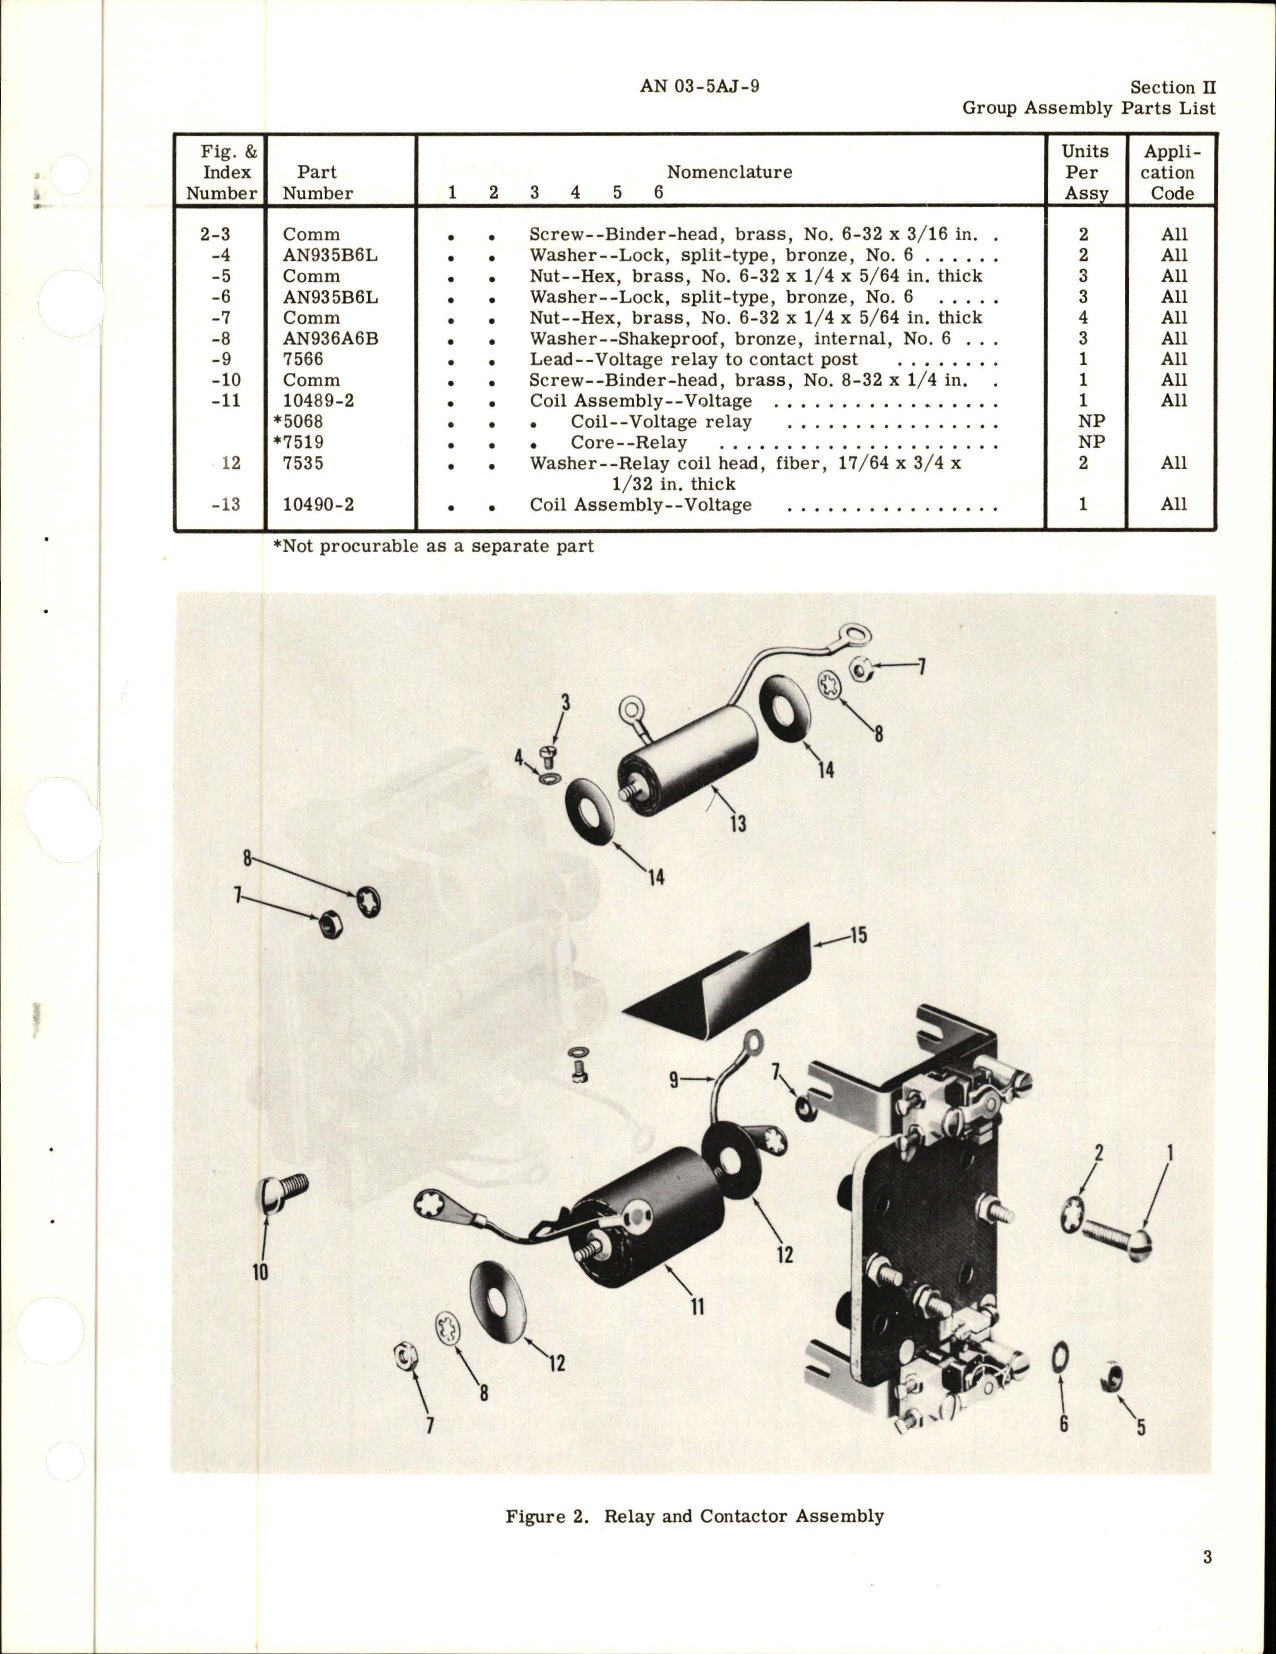 Sample page 5 from AirCorps Library document: Parts Catalog for Reverse Current Cutout - AN 3025-1 - Models A-700, A-700A, and A-718 